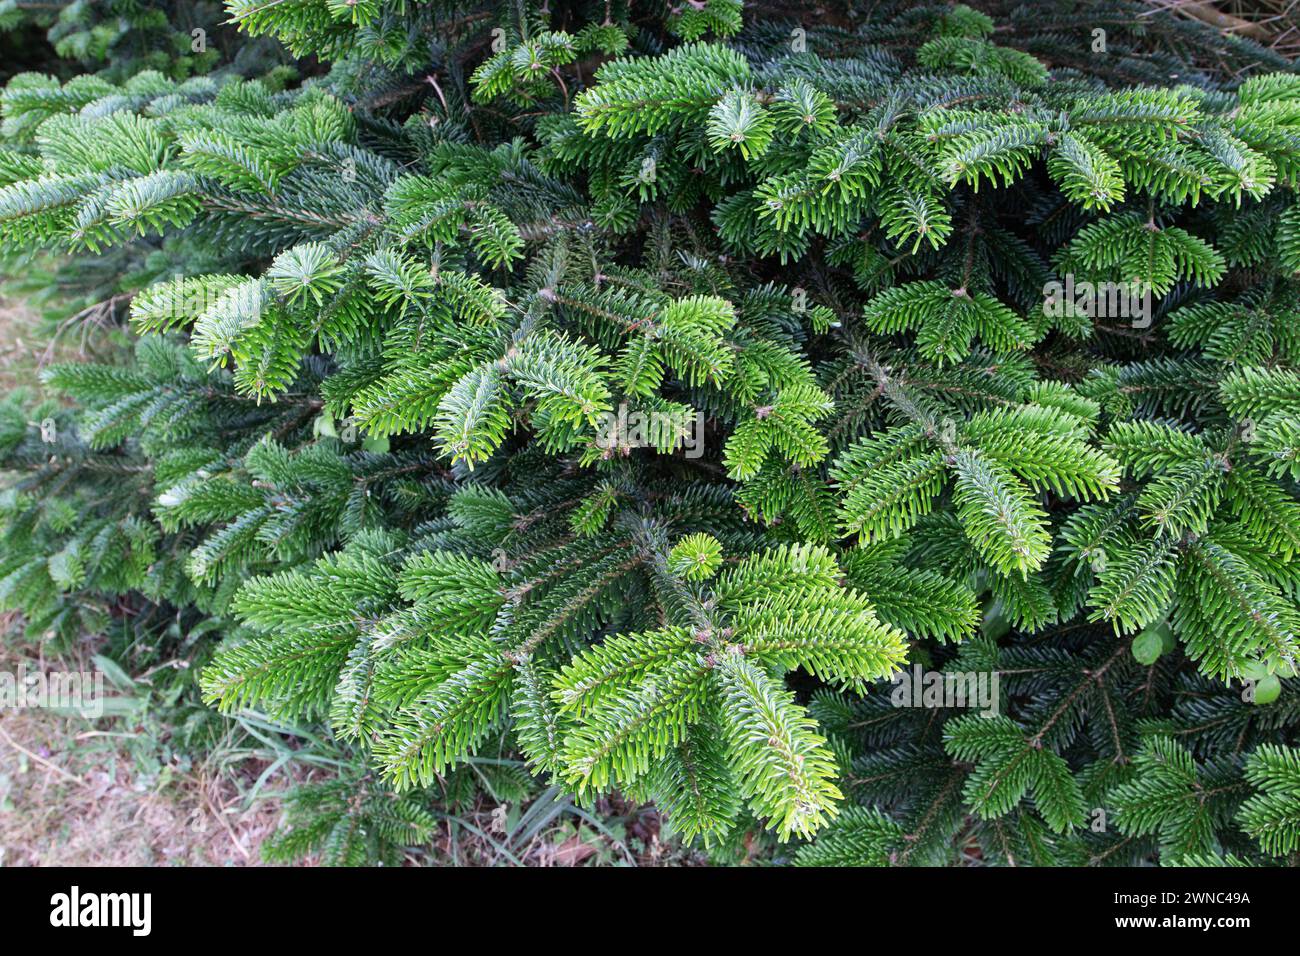 Fraser fir dark glaucous green foliage. Abies fraseri coniferous tree banches. She-balsam evergreen plant. Needle-like,leaves with two silvery white s Stock Photo